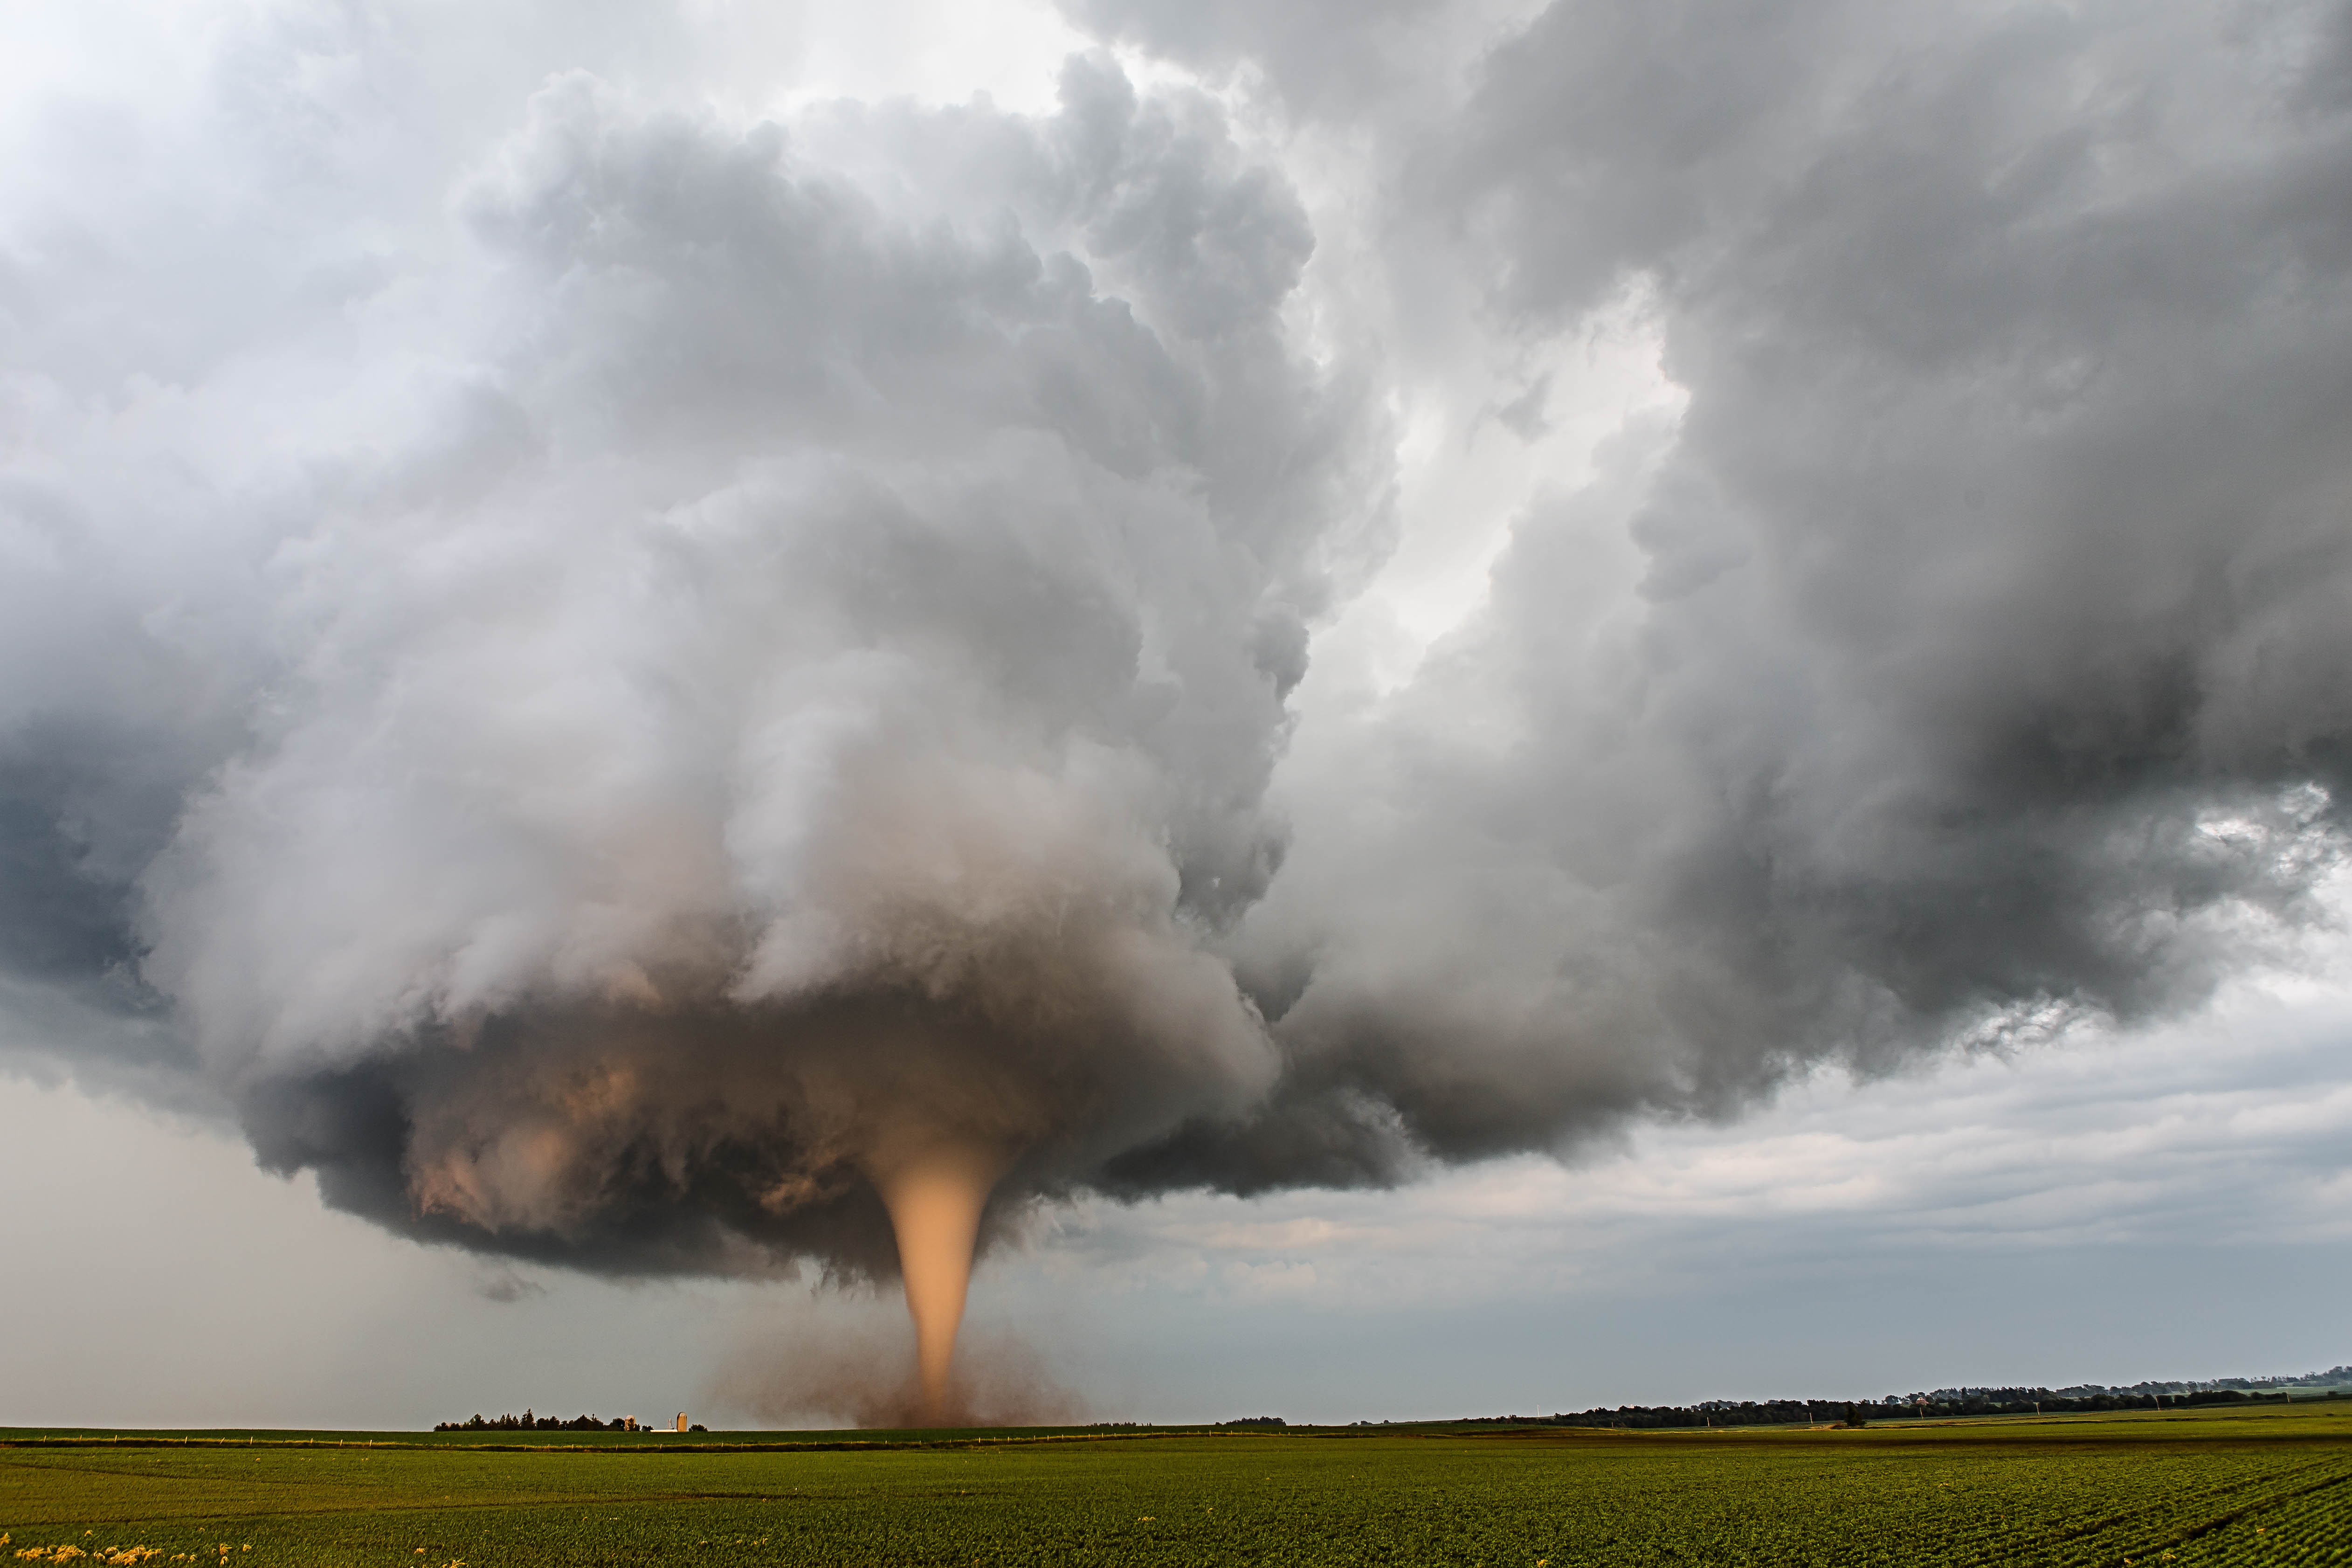 United States of America "A tornado churns up dust in the sunset light